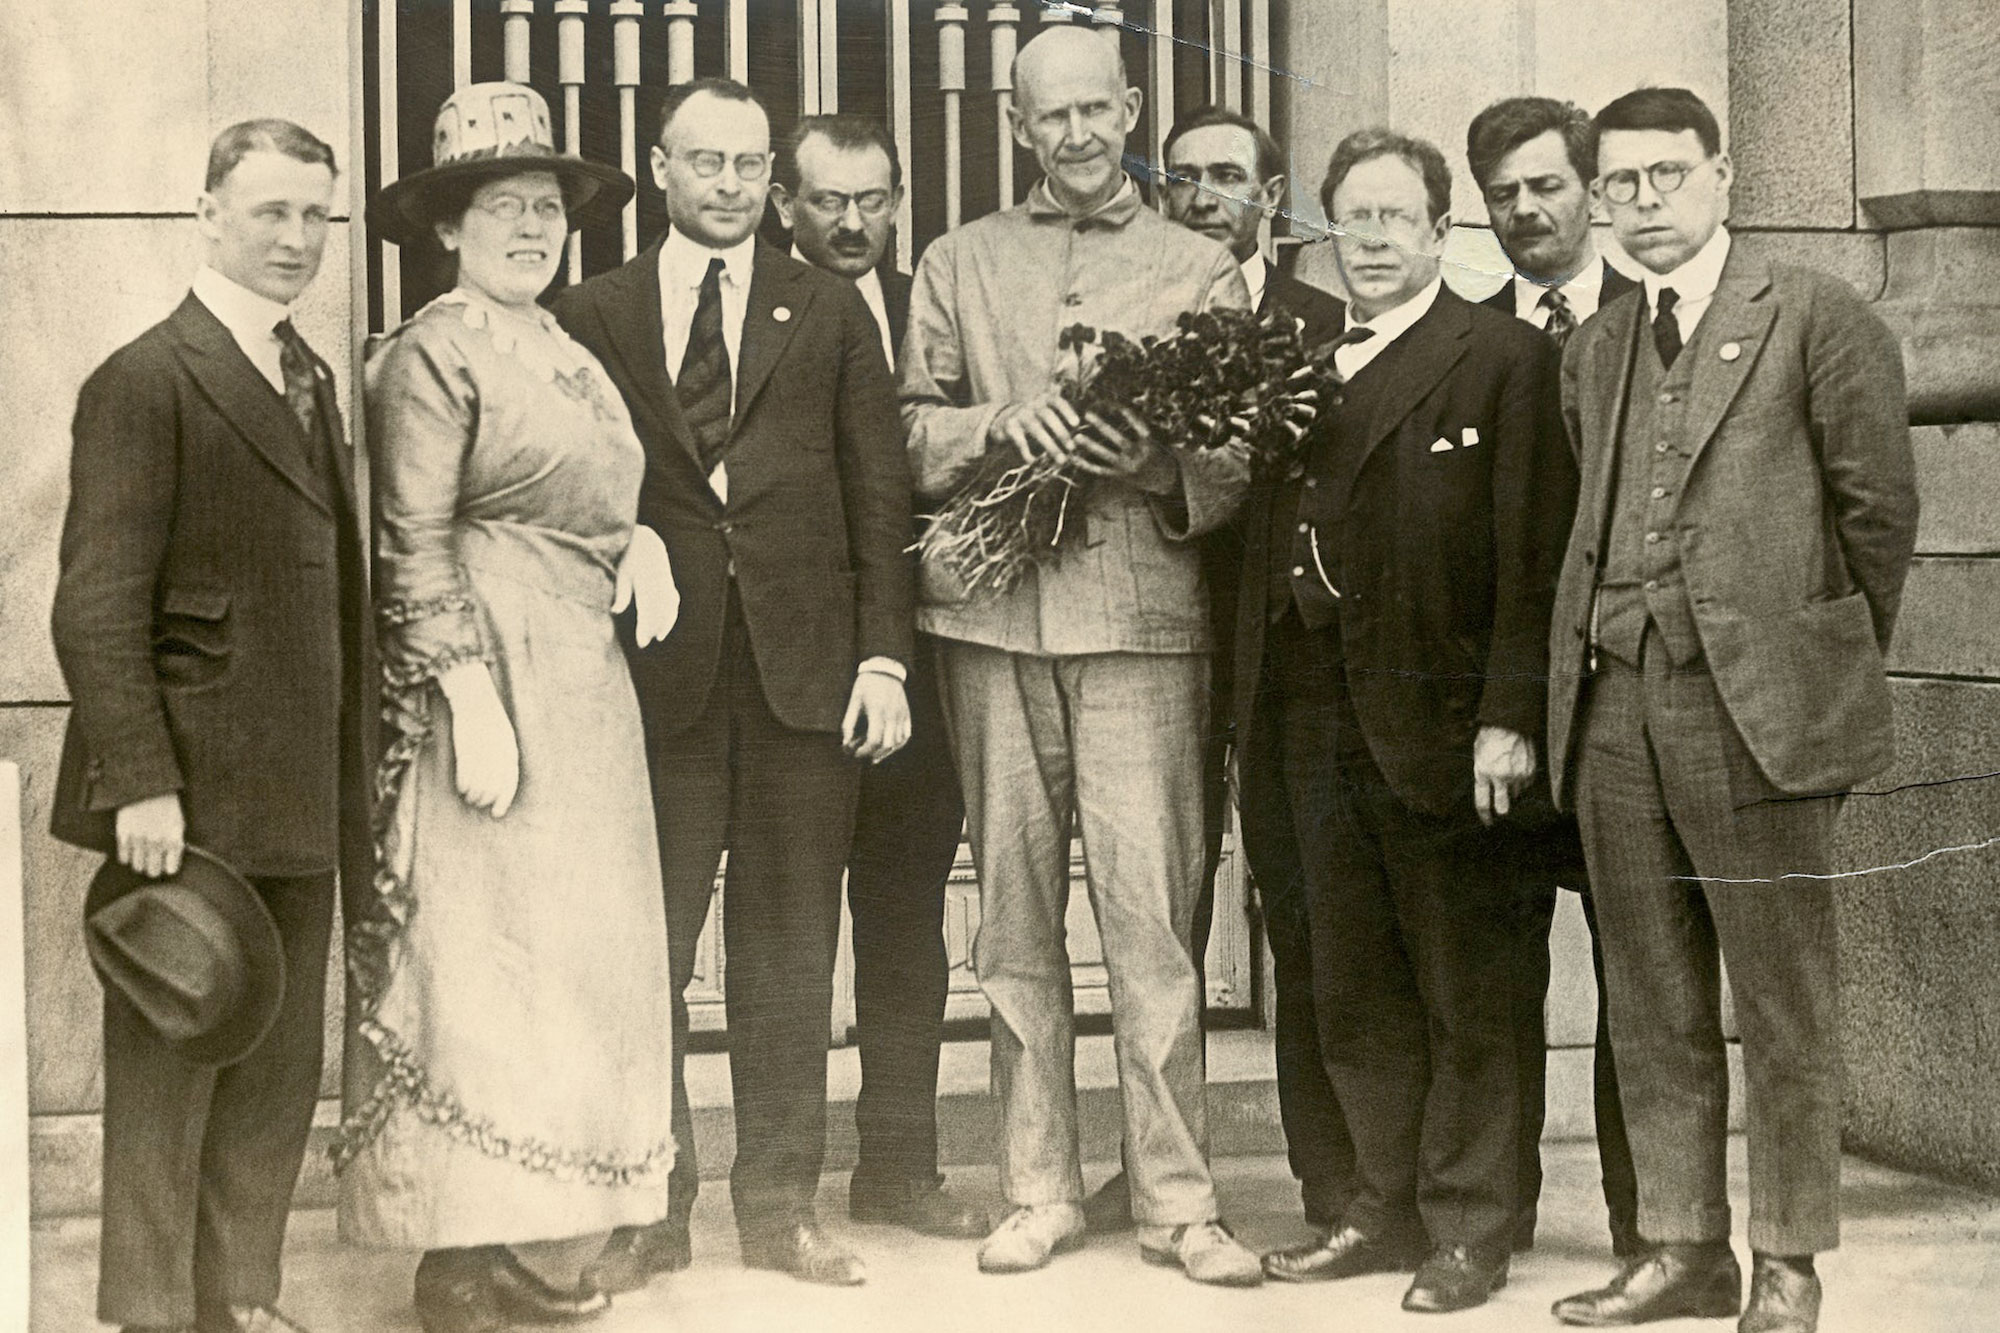 Eugene Debs holds flowers and is flanked by four other people on either side of him